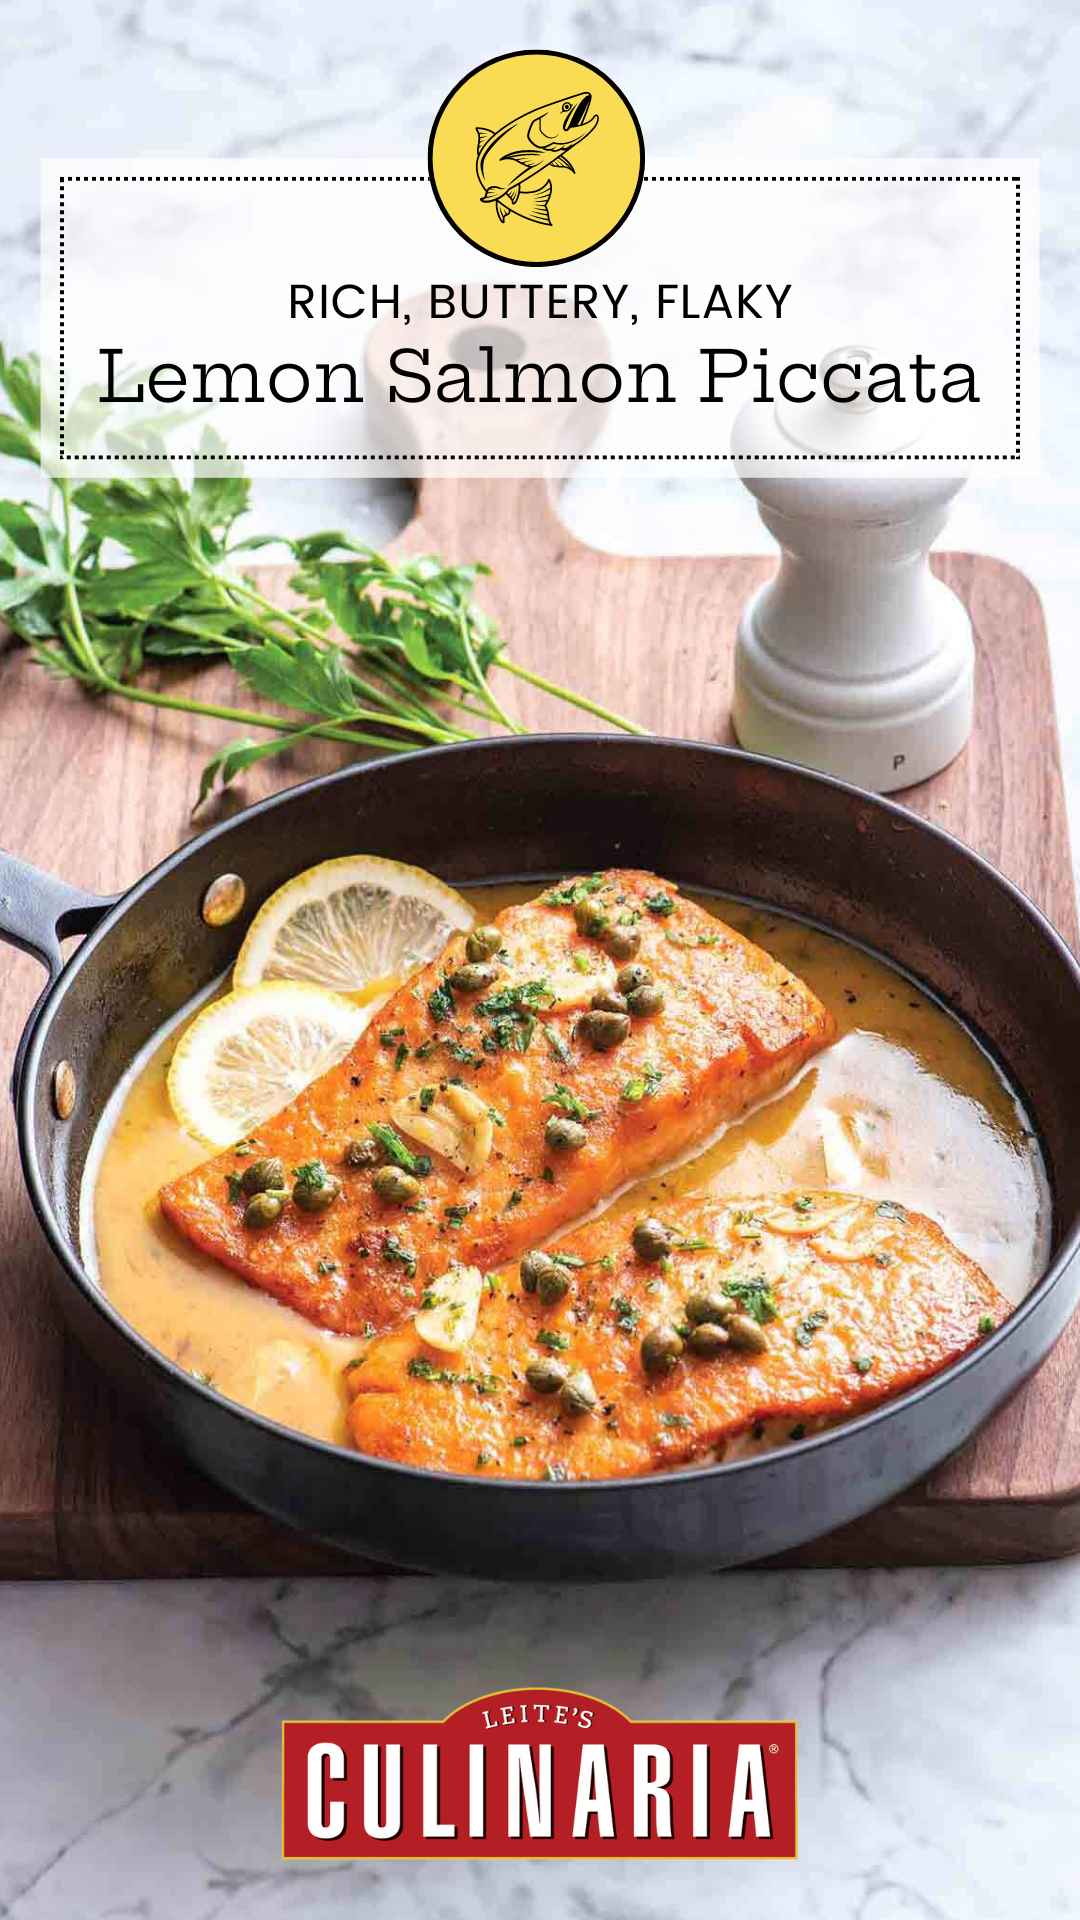 Two salmon fillets in a skillet with sliced lemons, capers and butter sauce.